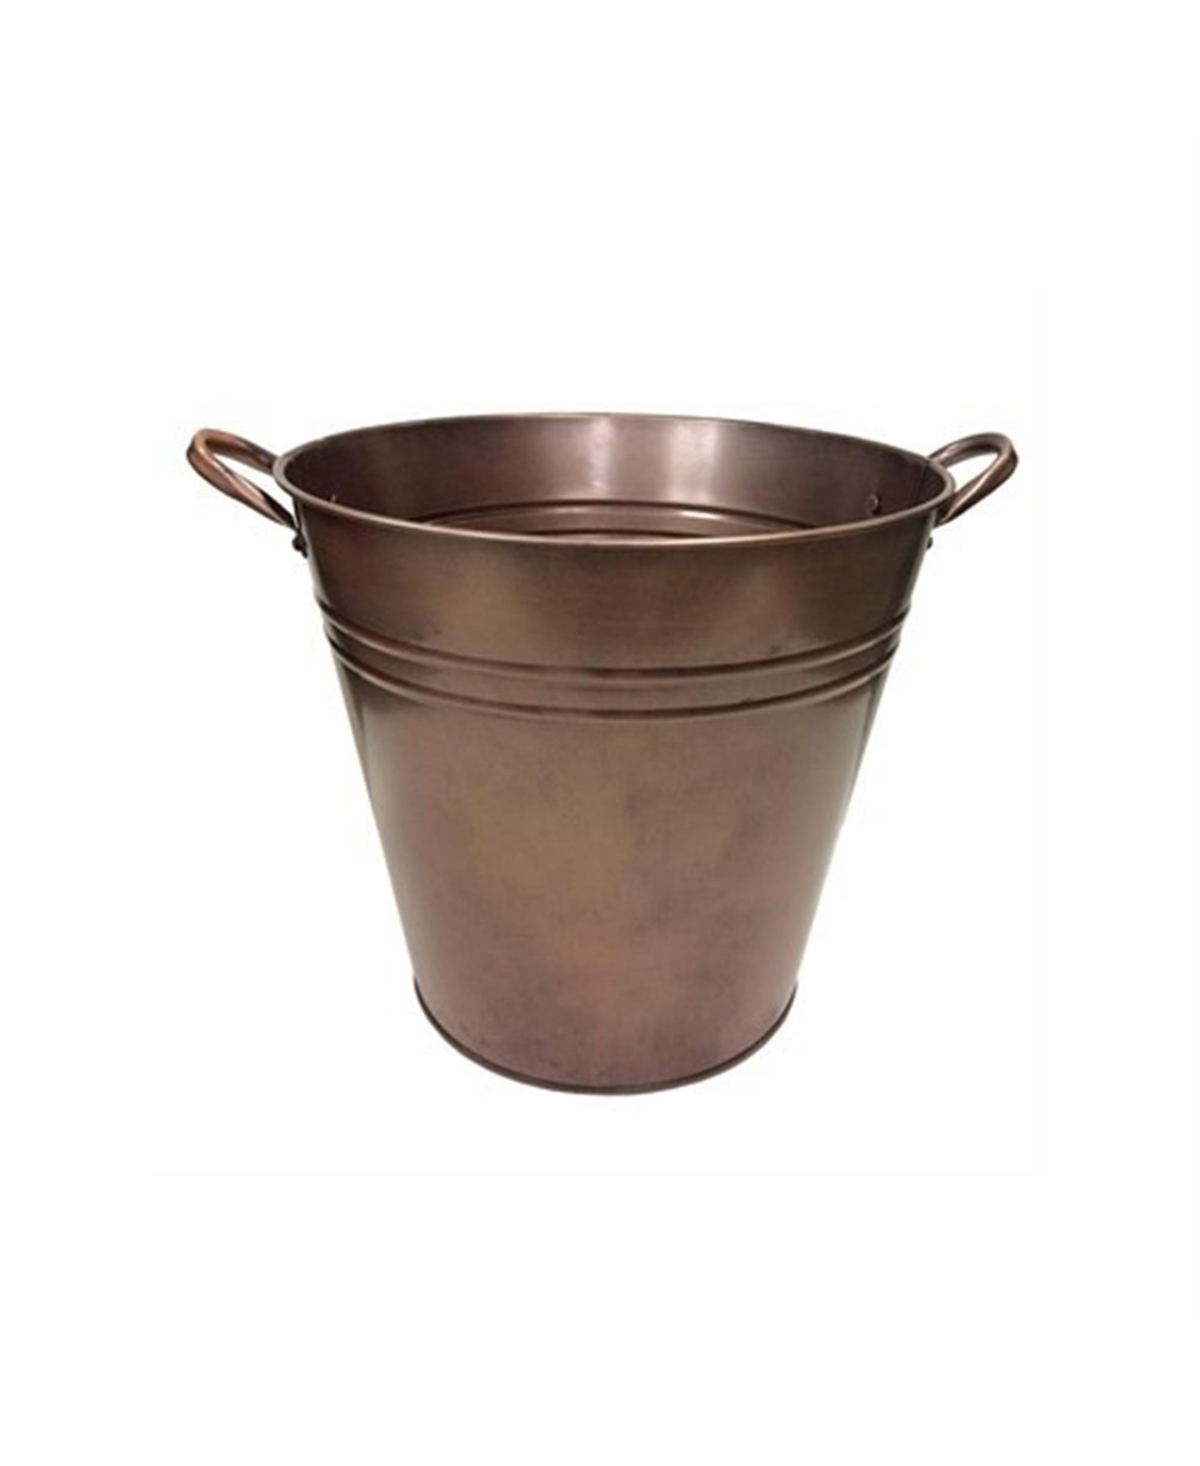 Famrhouse Collection Tin Bucket, Antique Copper - Copper